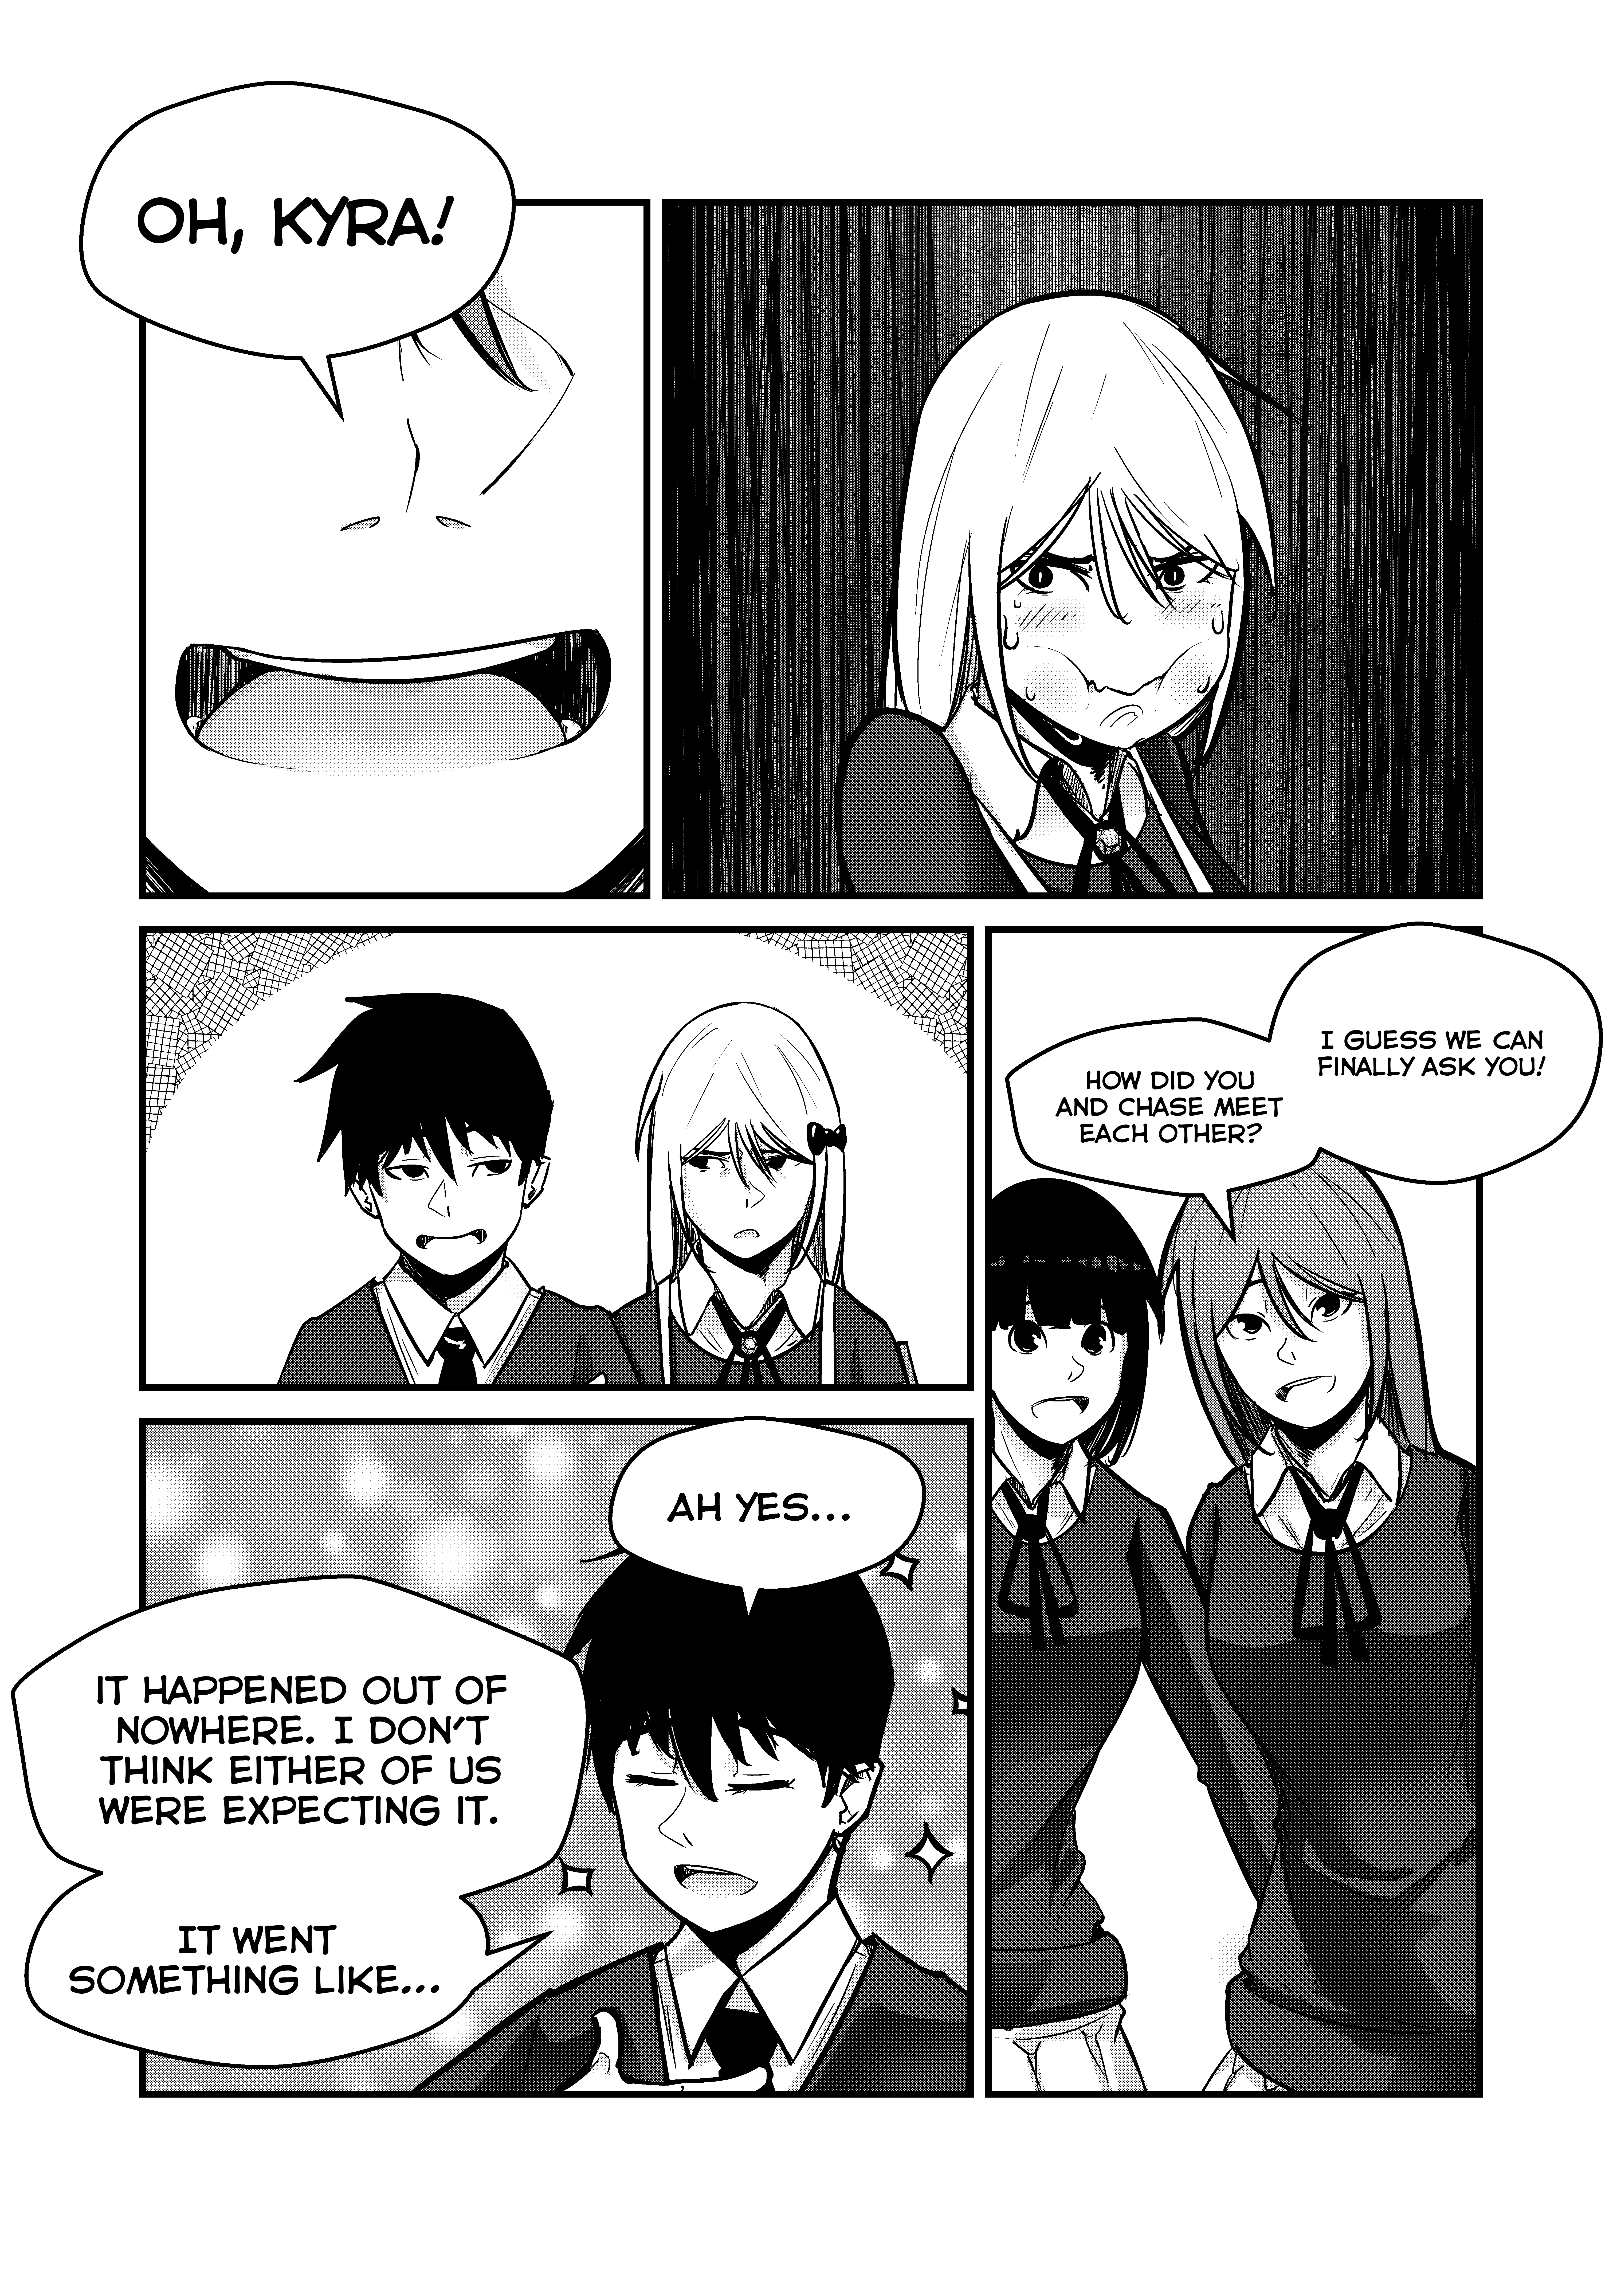 Opposites In Disguise - 5 page 6